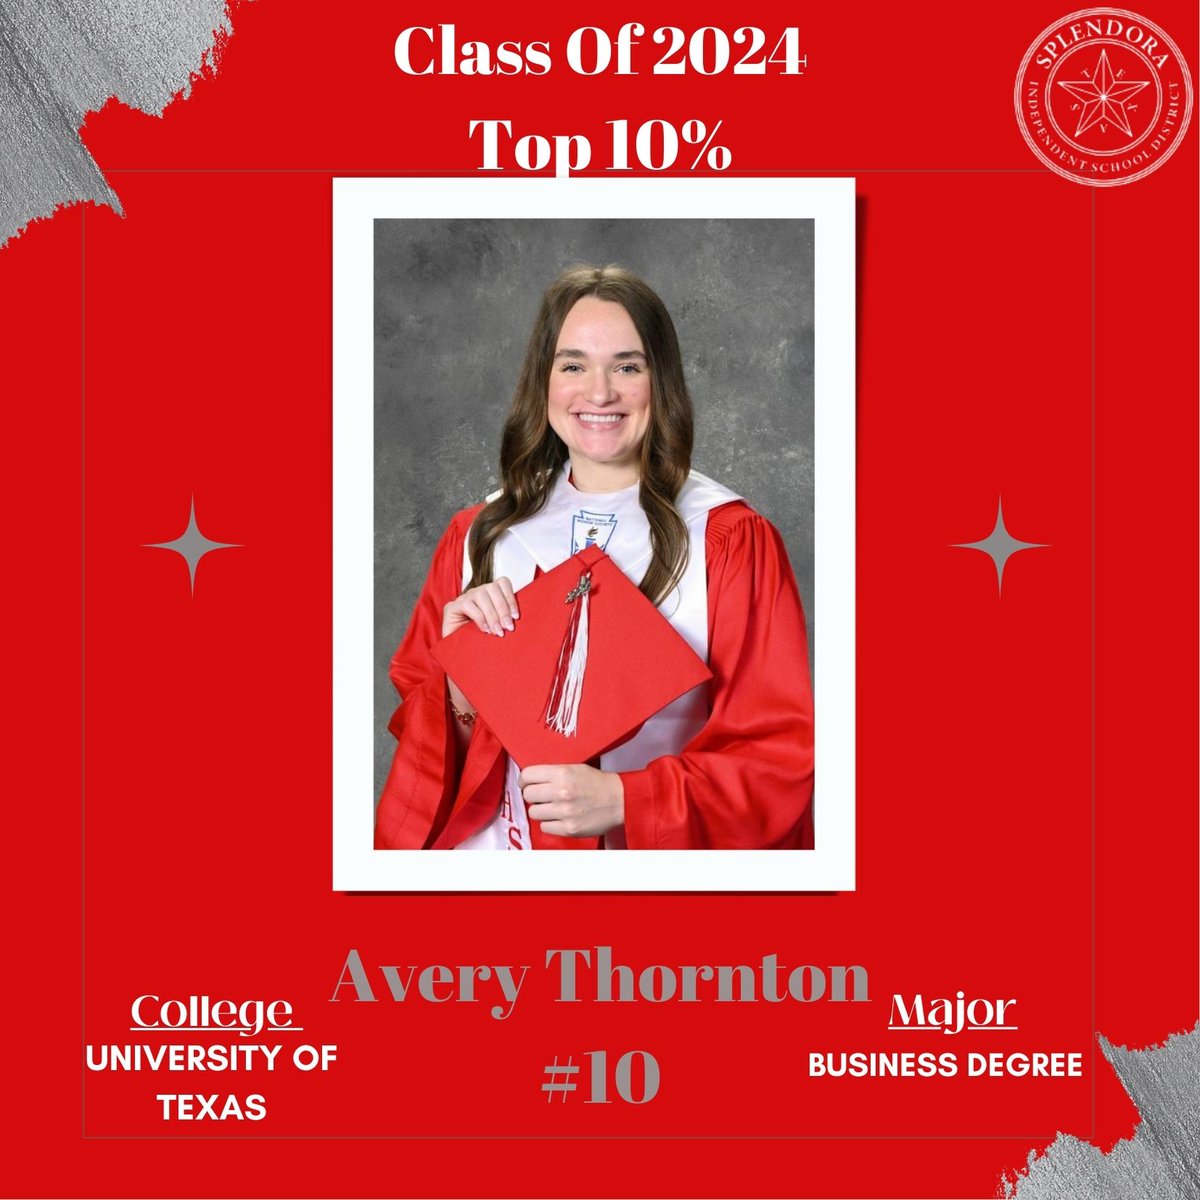 We would like to congratulate each student in the top 10 percent of the graduating 2024 class. We are very proud of their academic accomplishments. We will be counting down each day to celebrate each of our students' success. Congratulations, Avery Thornton - #10!